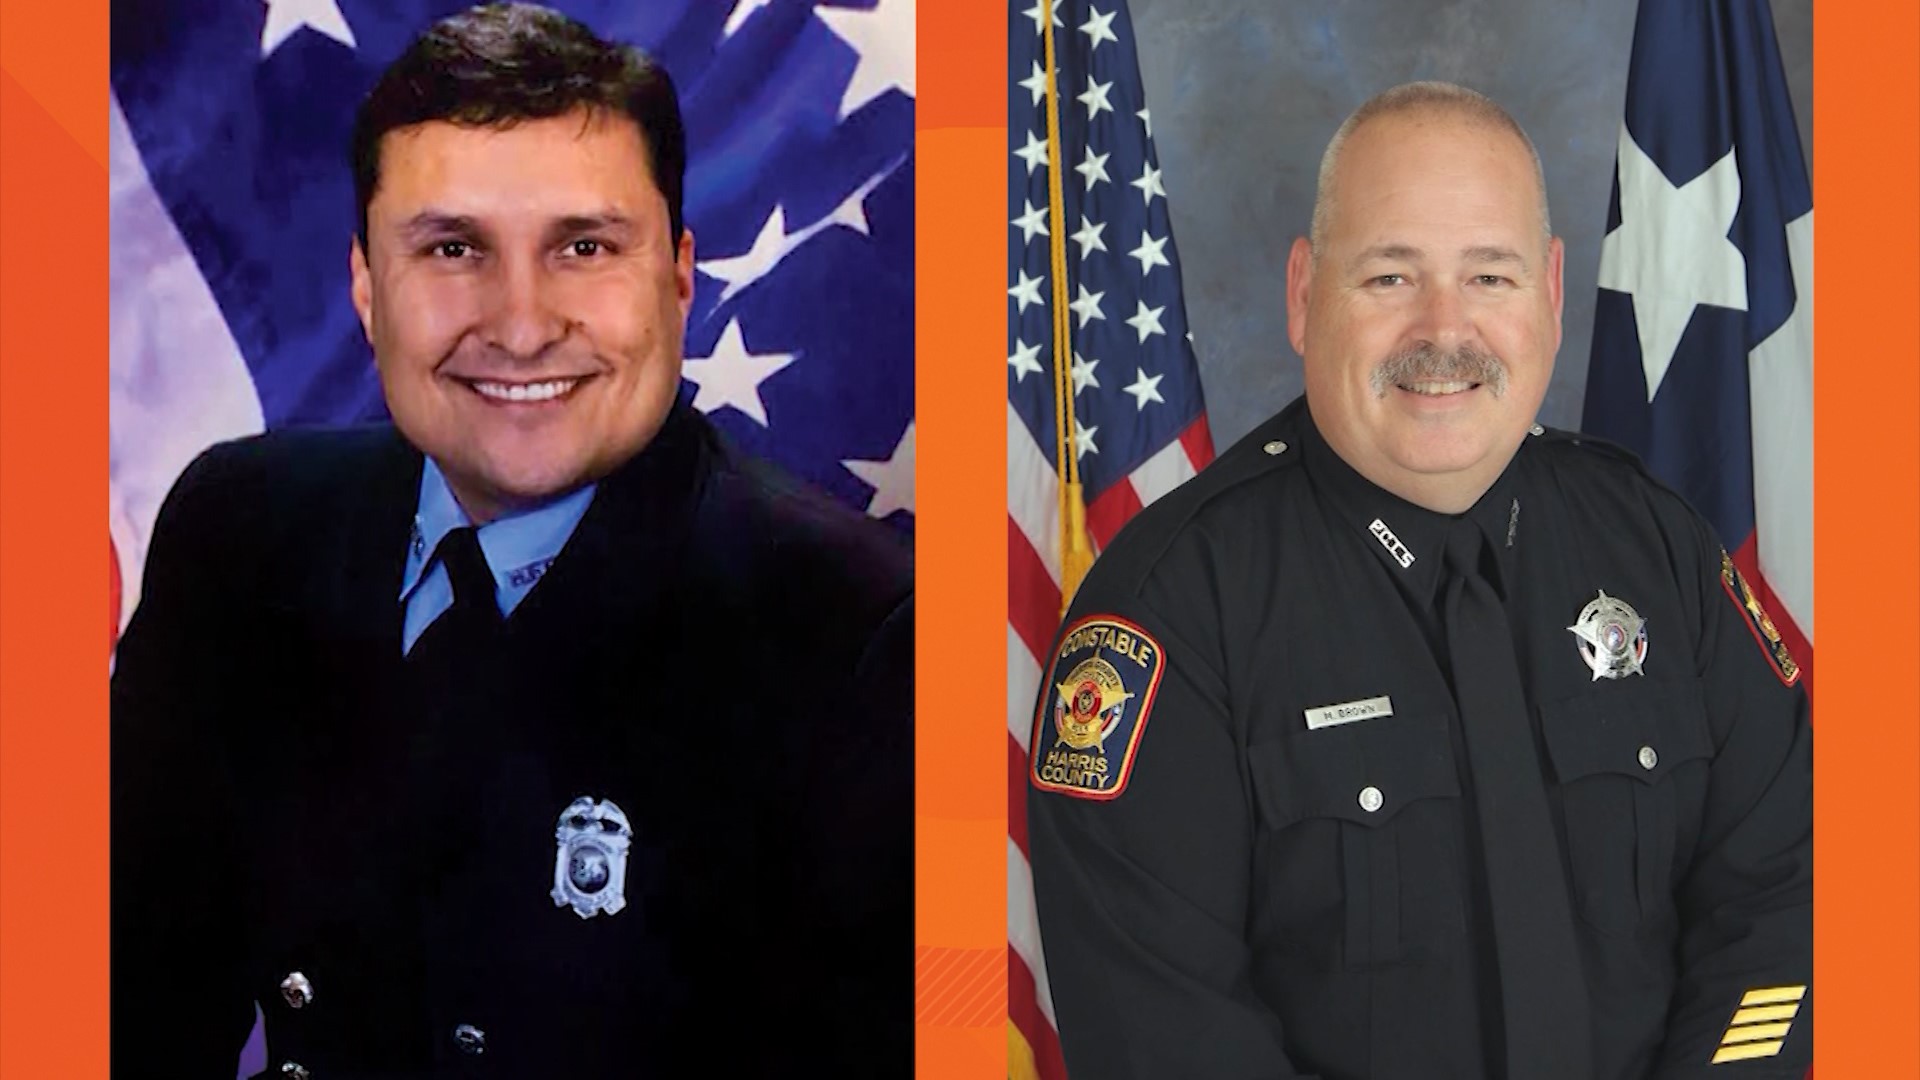 Two local heroes were honored for their service in the community as both lost their lives to COVID-19: Jerry Pacheco and Mark Brown.